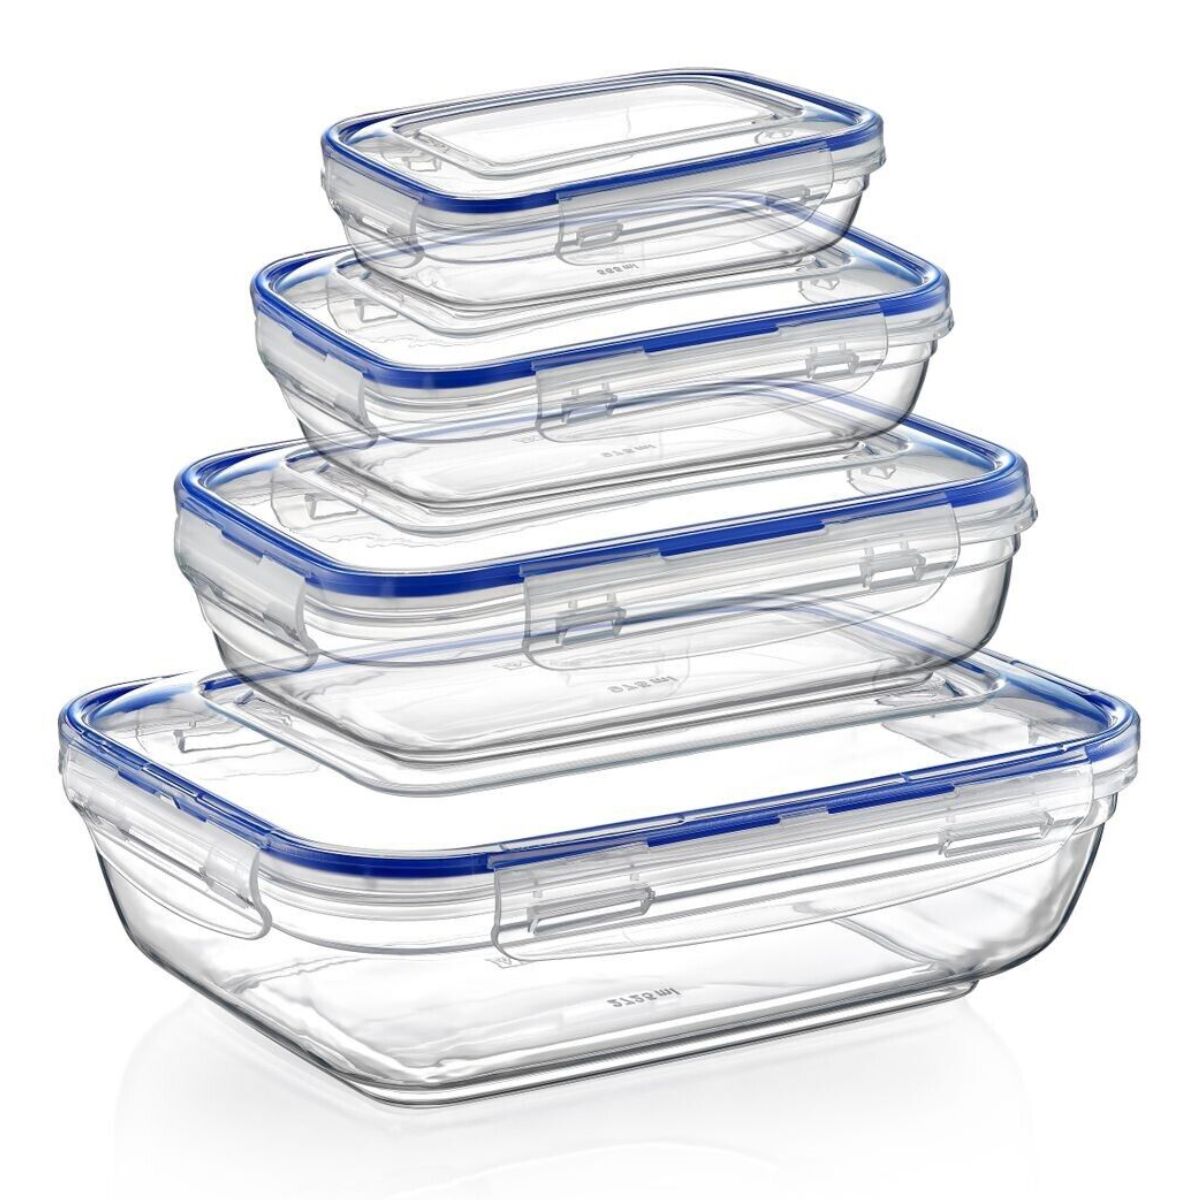 A stack of Lock & Fresh - Seal Rectangle Storage  - 4pcs containers with blue lids.